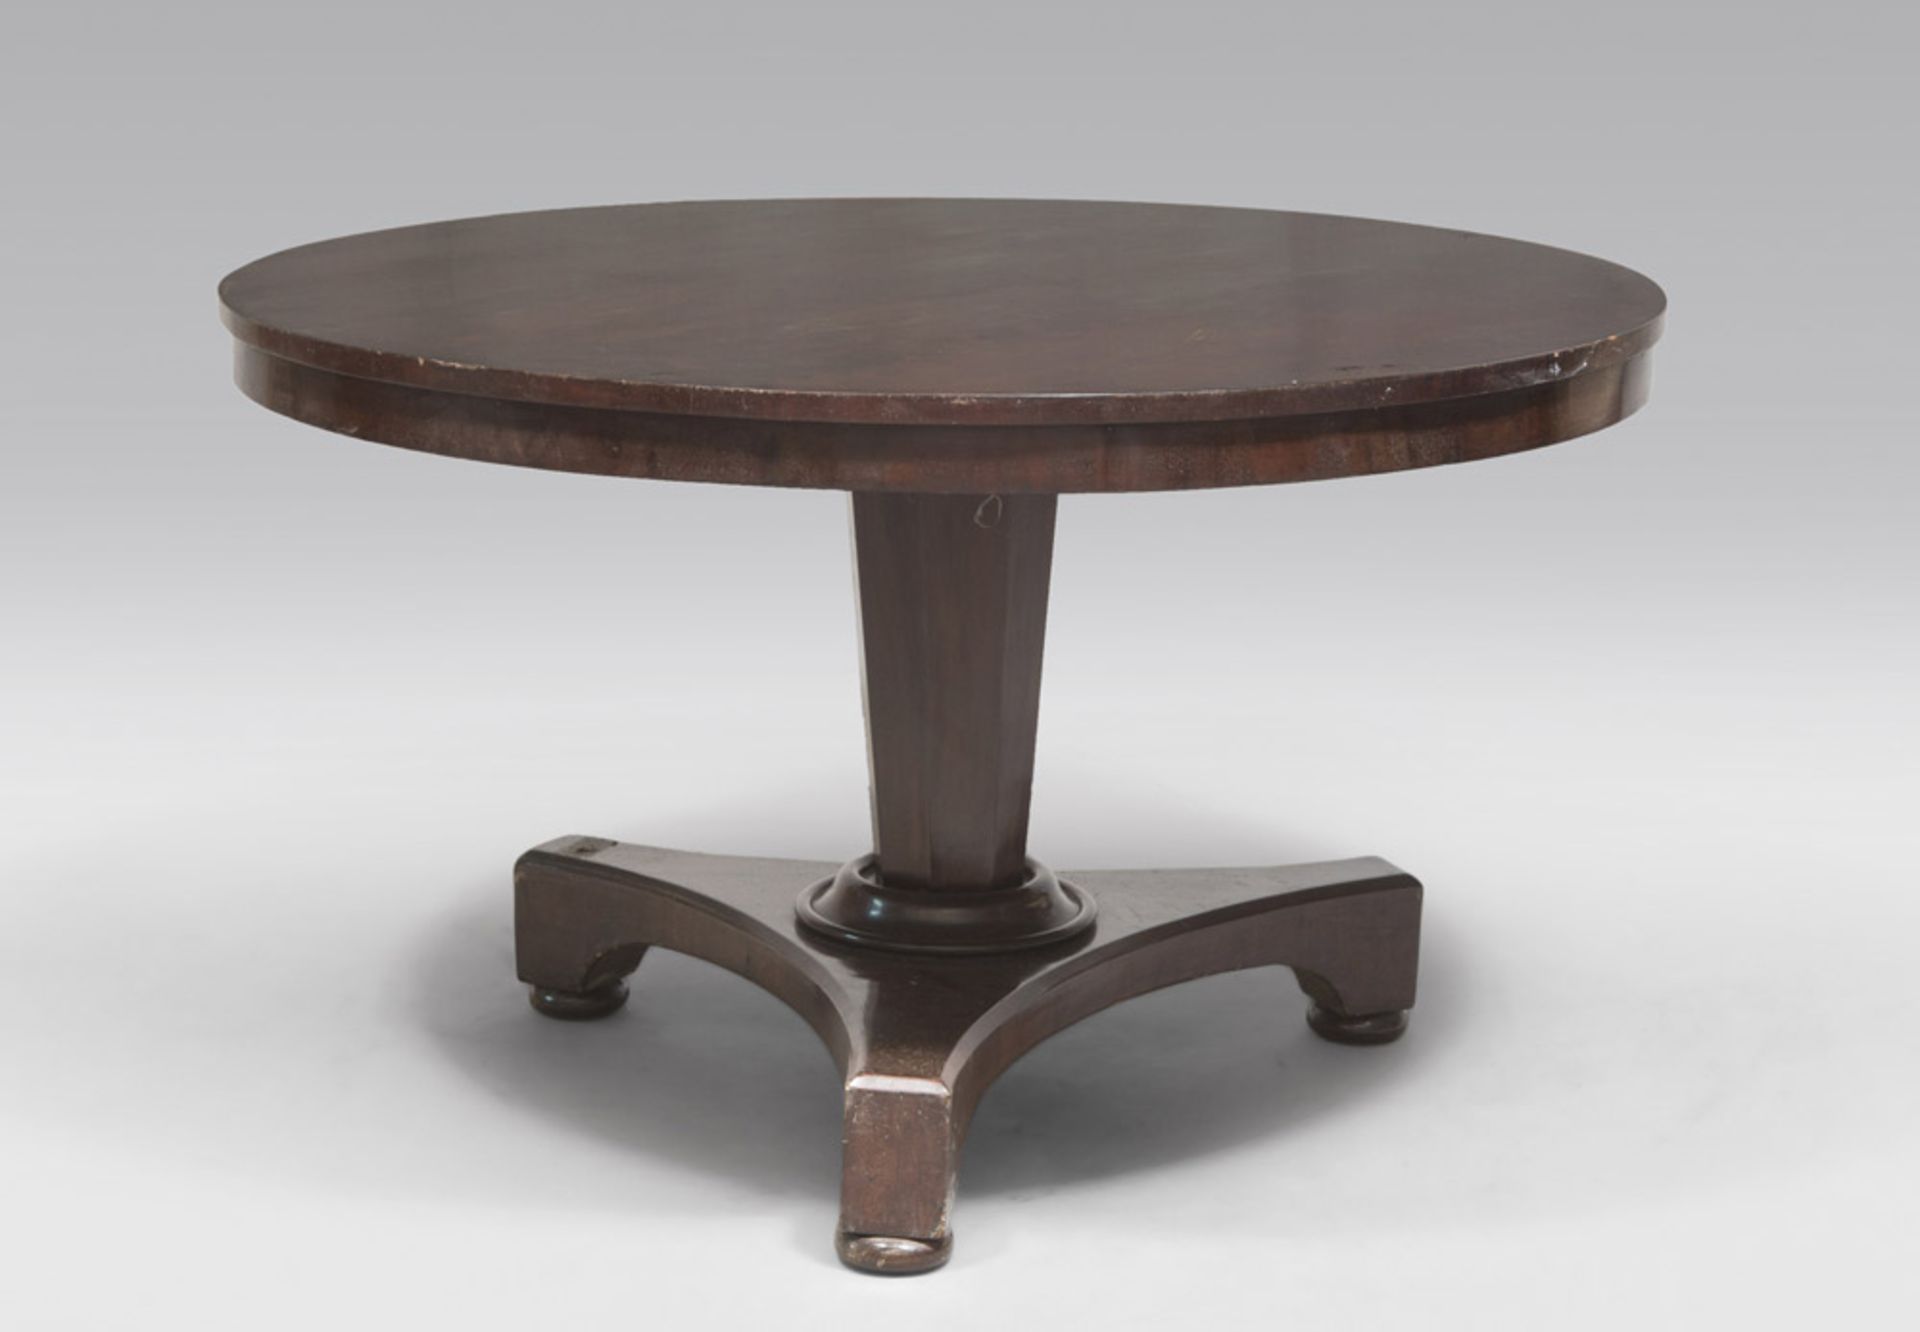 Round rosewood table, mid 19th century. Measures cm. 80 x 122. TAVOLO CIRCOLARE IN PALISSANDRO, METÁ